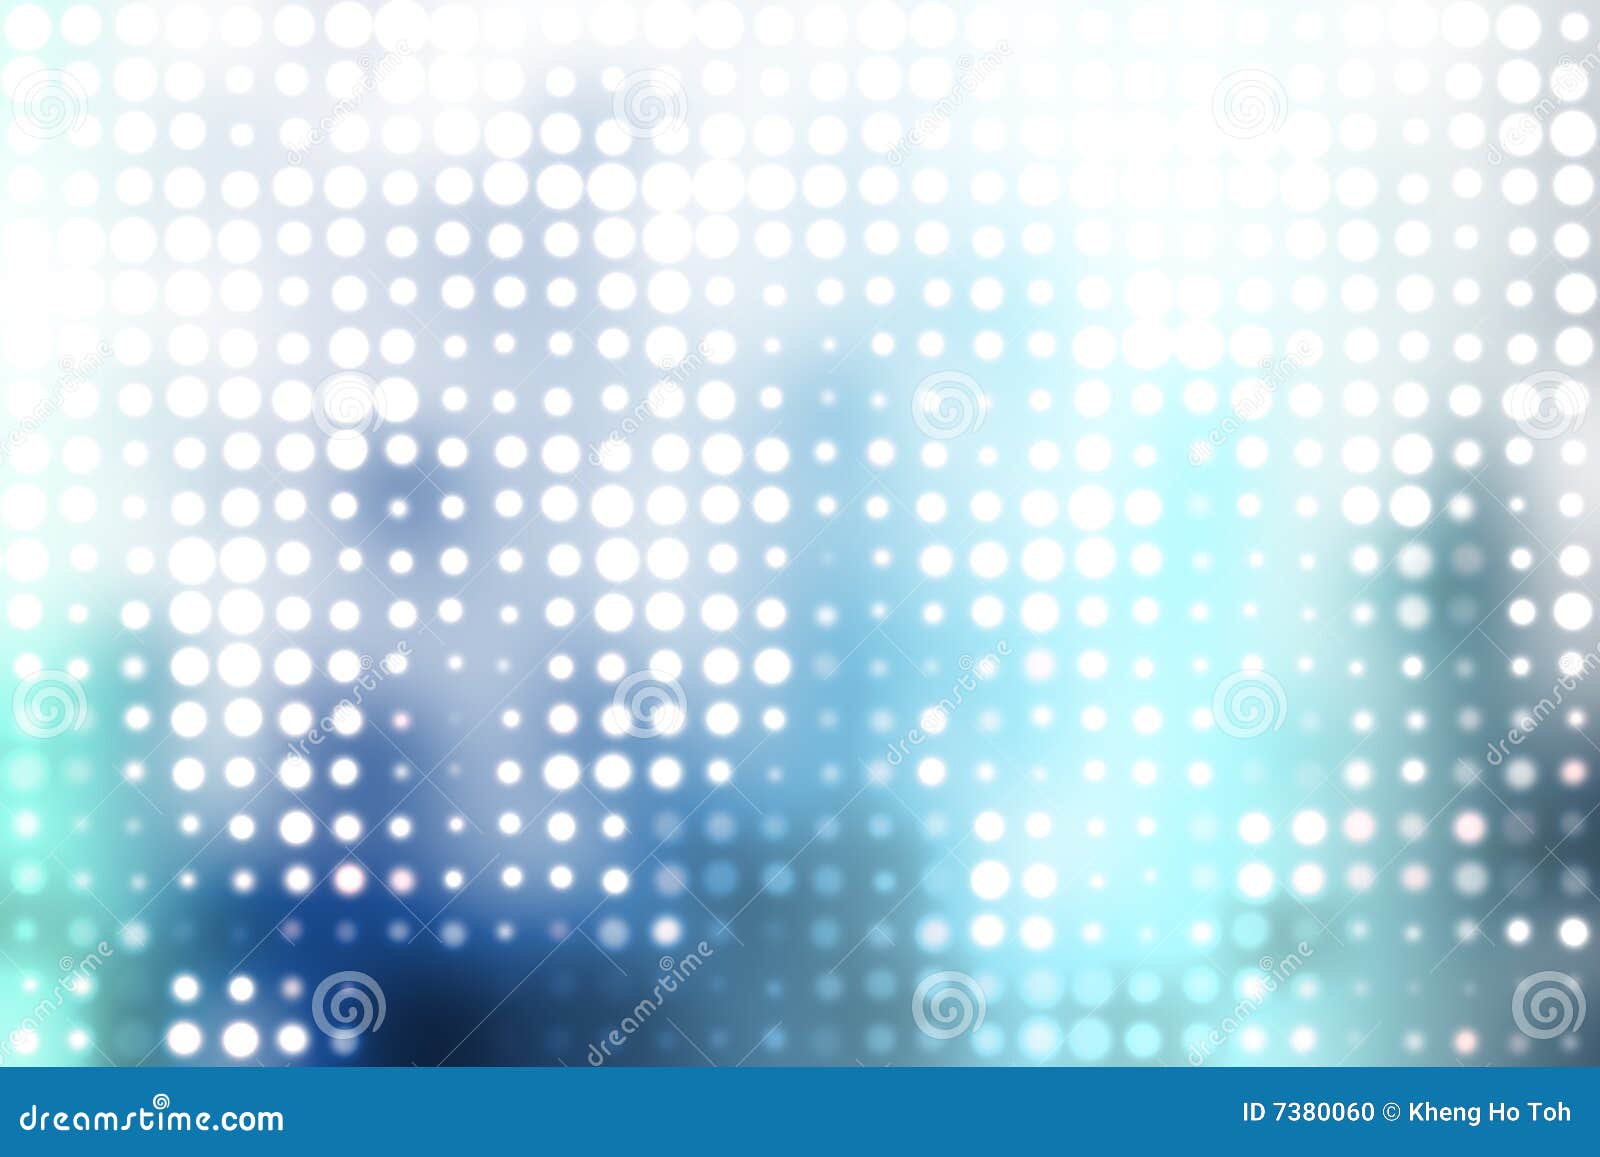 Blue And White Trendy Orbs Abstract Background Stock Photo   Image 